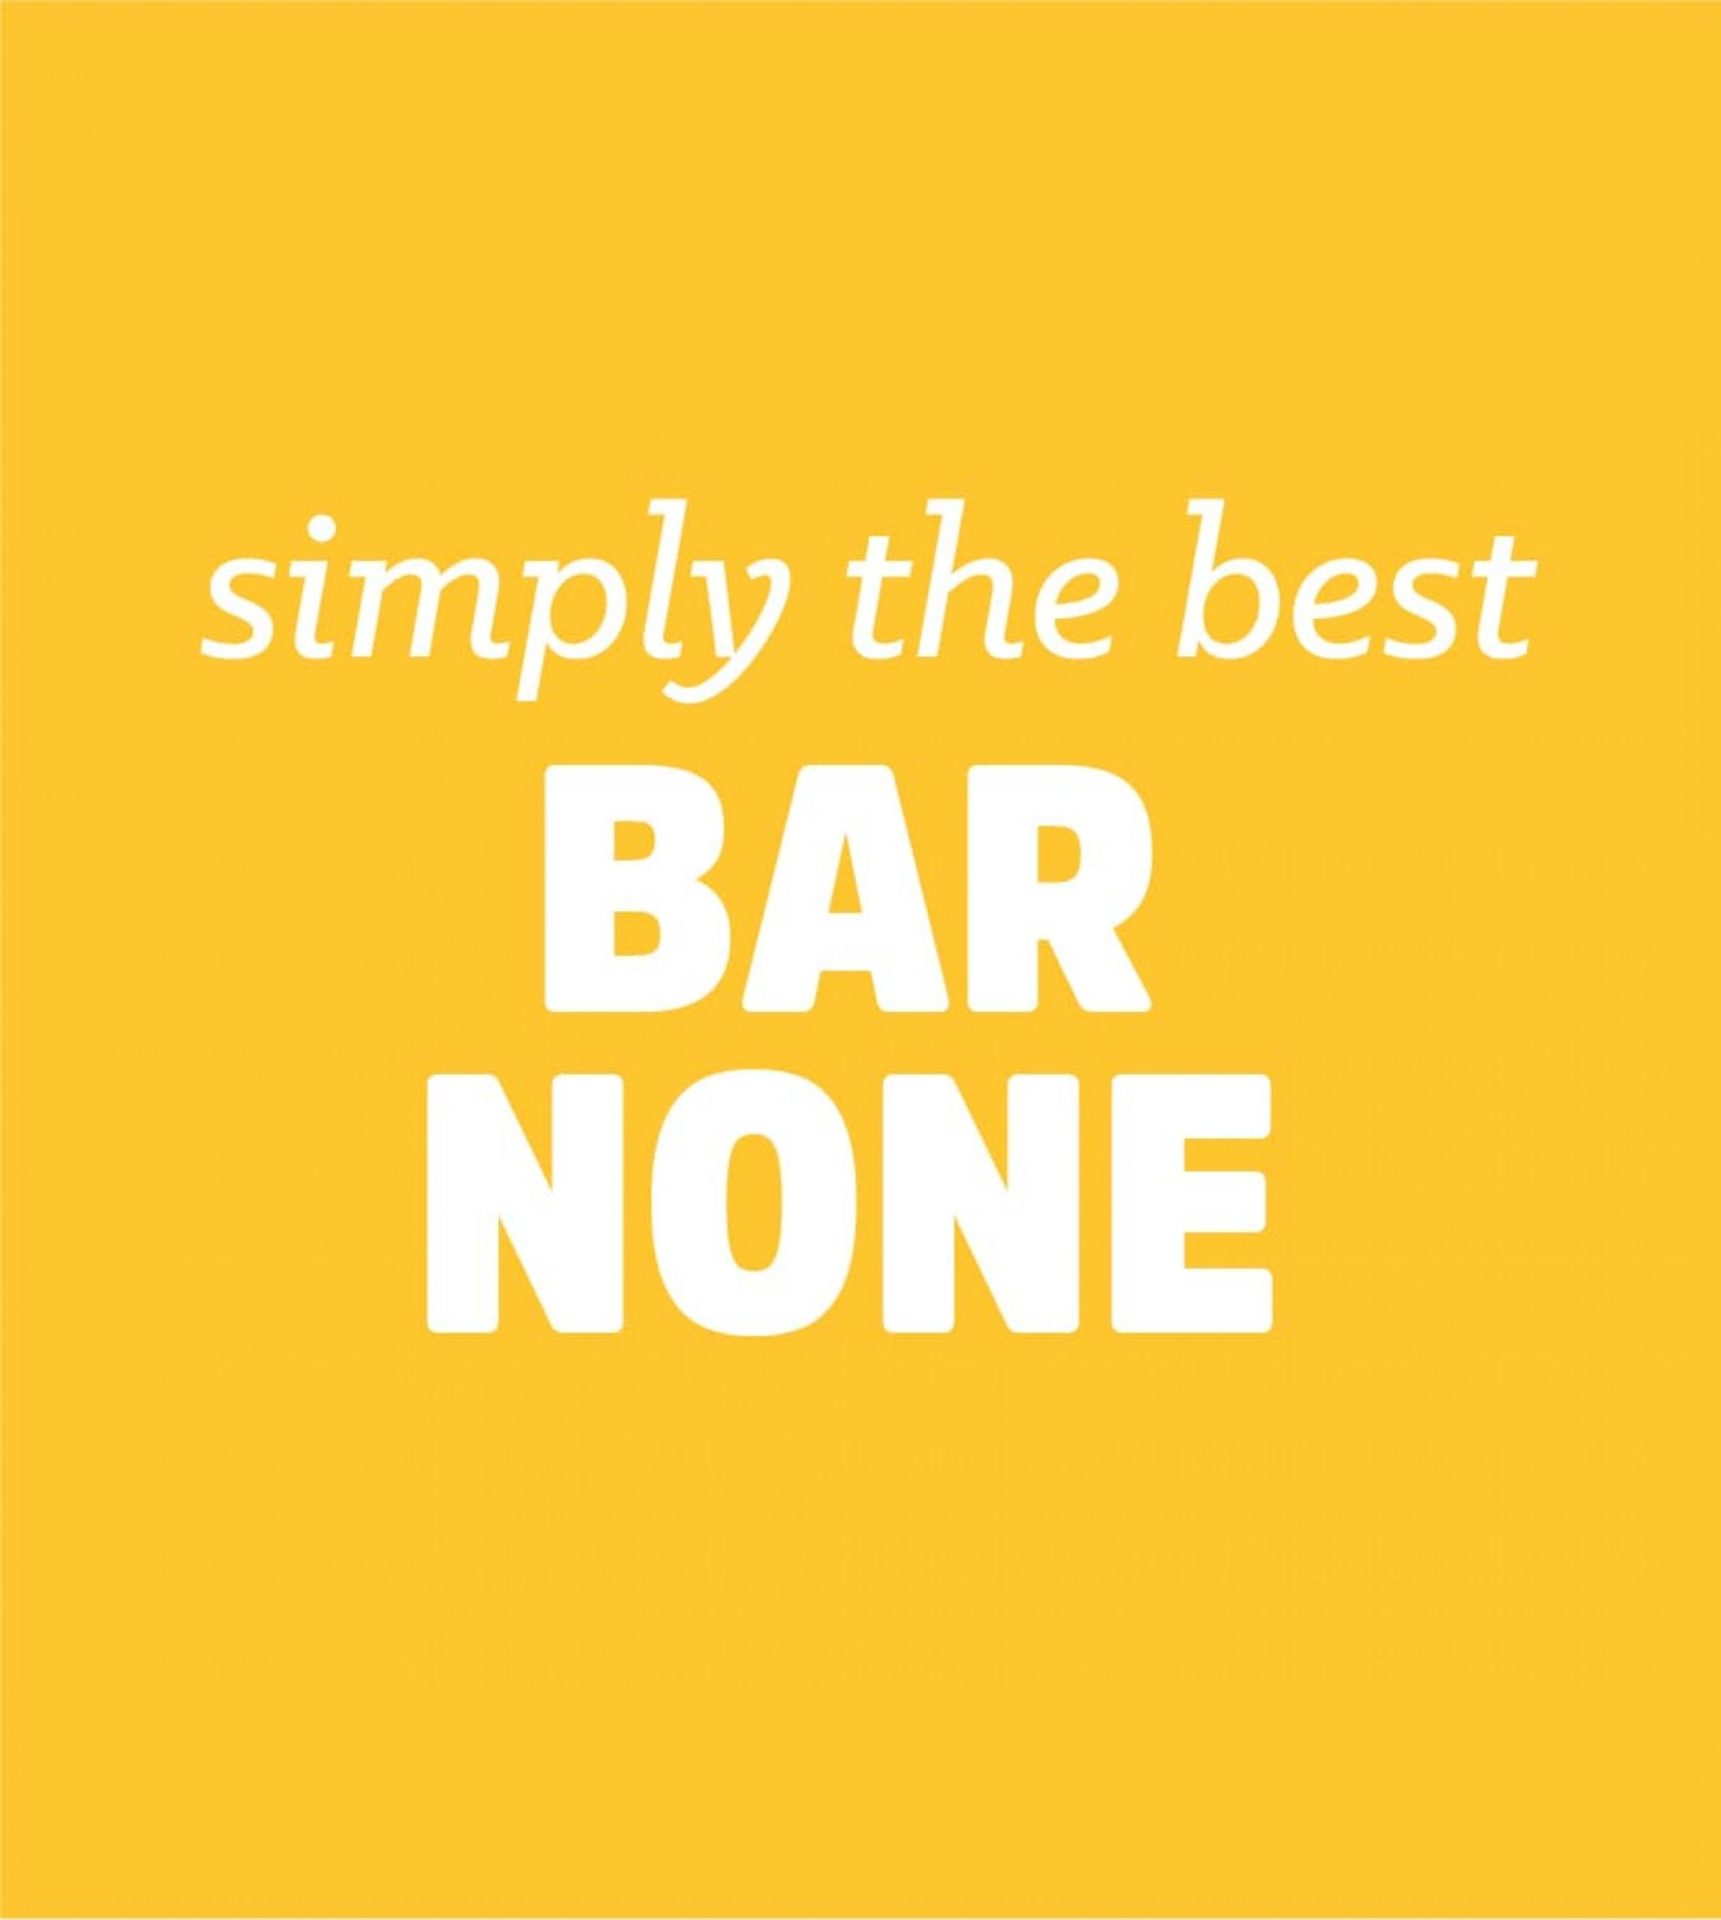 simply the best BAR NONE